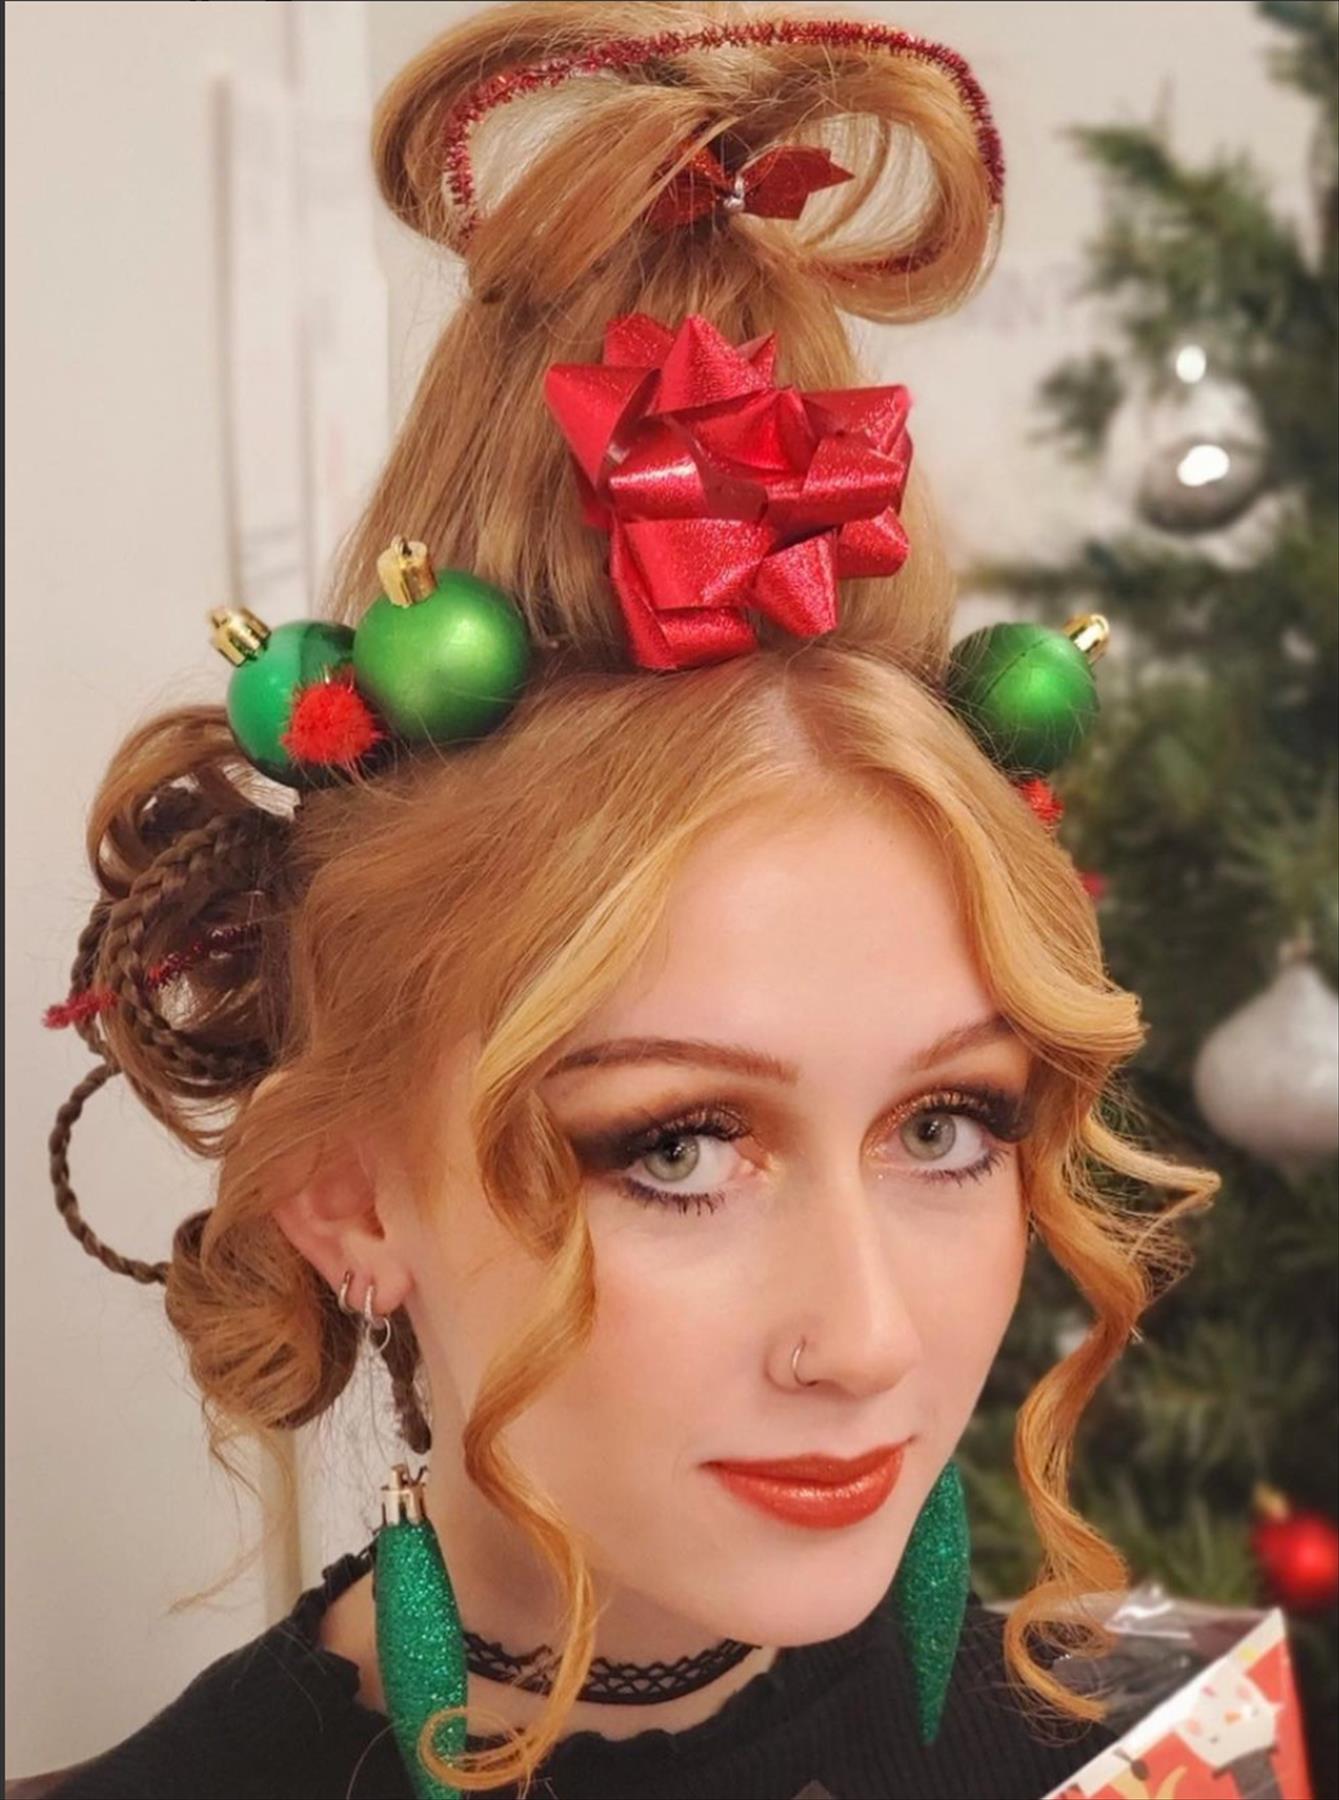 Cindy Lou Who Hair: How to do this whoville hair